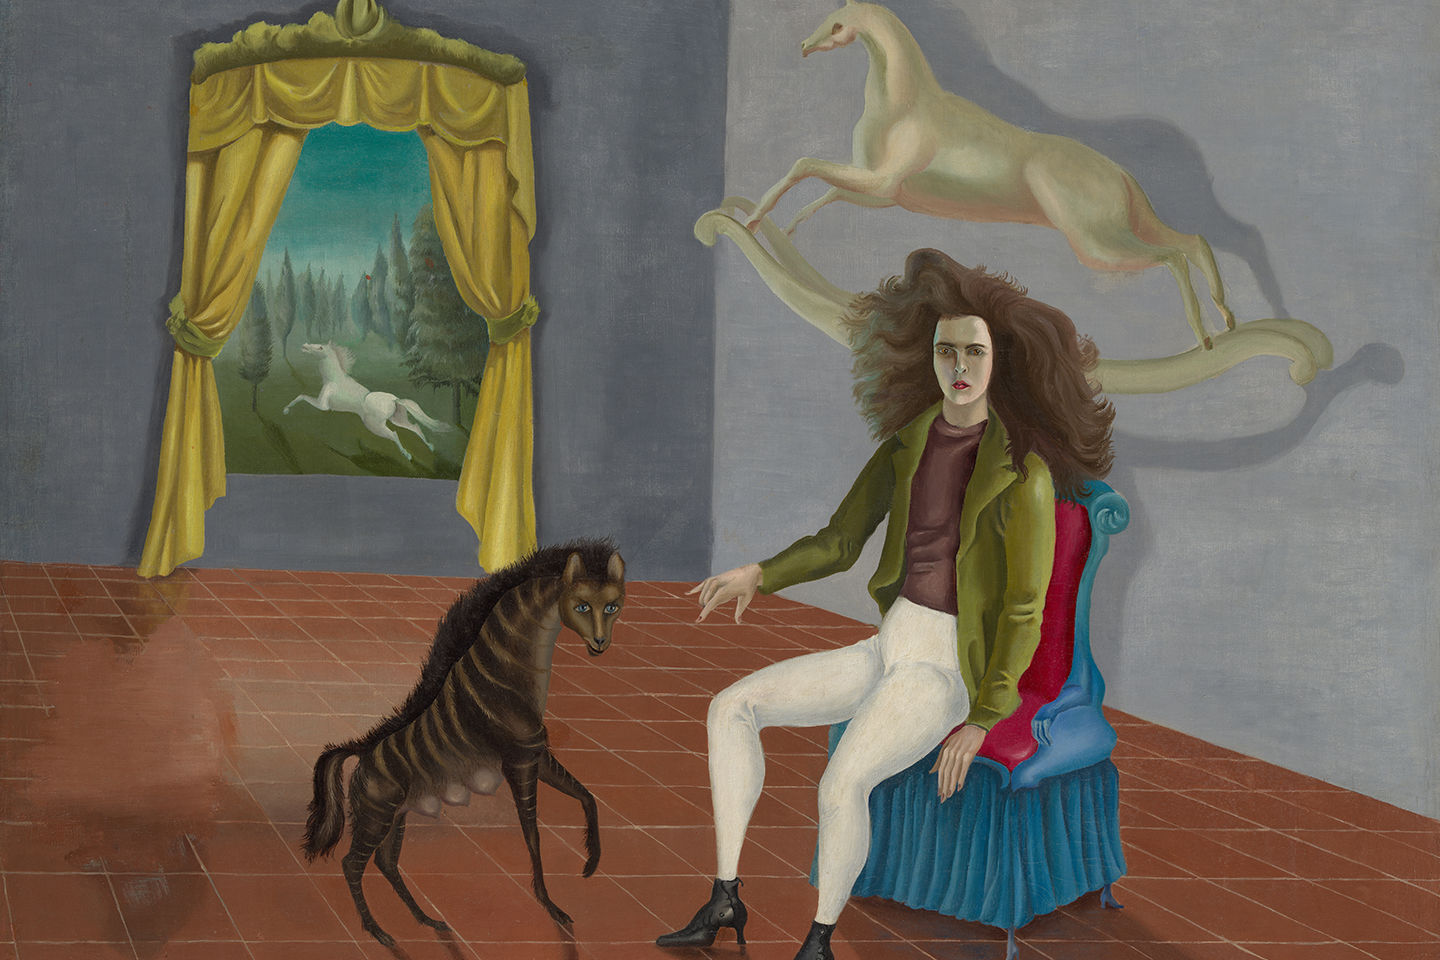 Detail of Leonora Carrington’s self-portrait of her sporting white jodhpurs and a wild mane of hair; she’s perched on the edge of a chair with her hand outstretched toward the prancing hyena and her back to two horses: a tailless white rocking horse flying behind her and a galloping white horse visible in a curtained window.